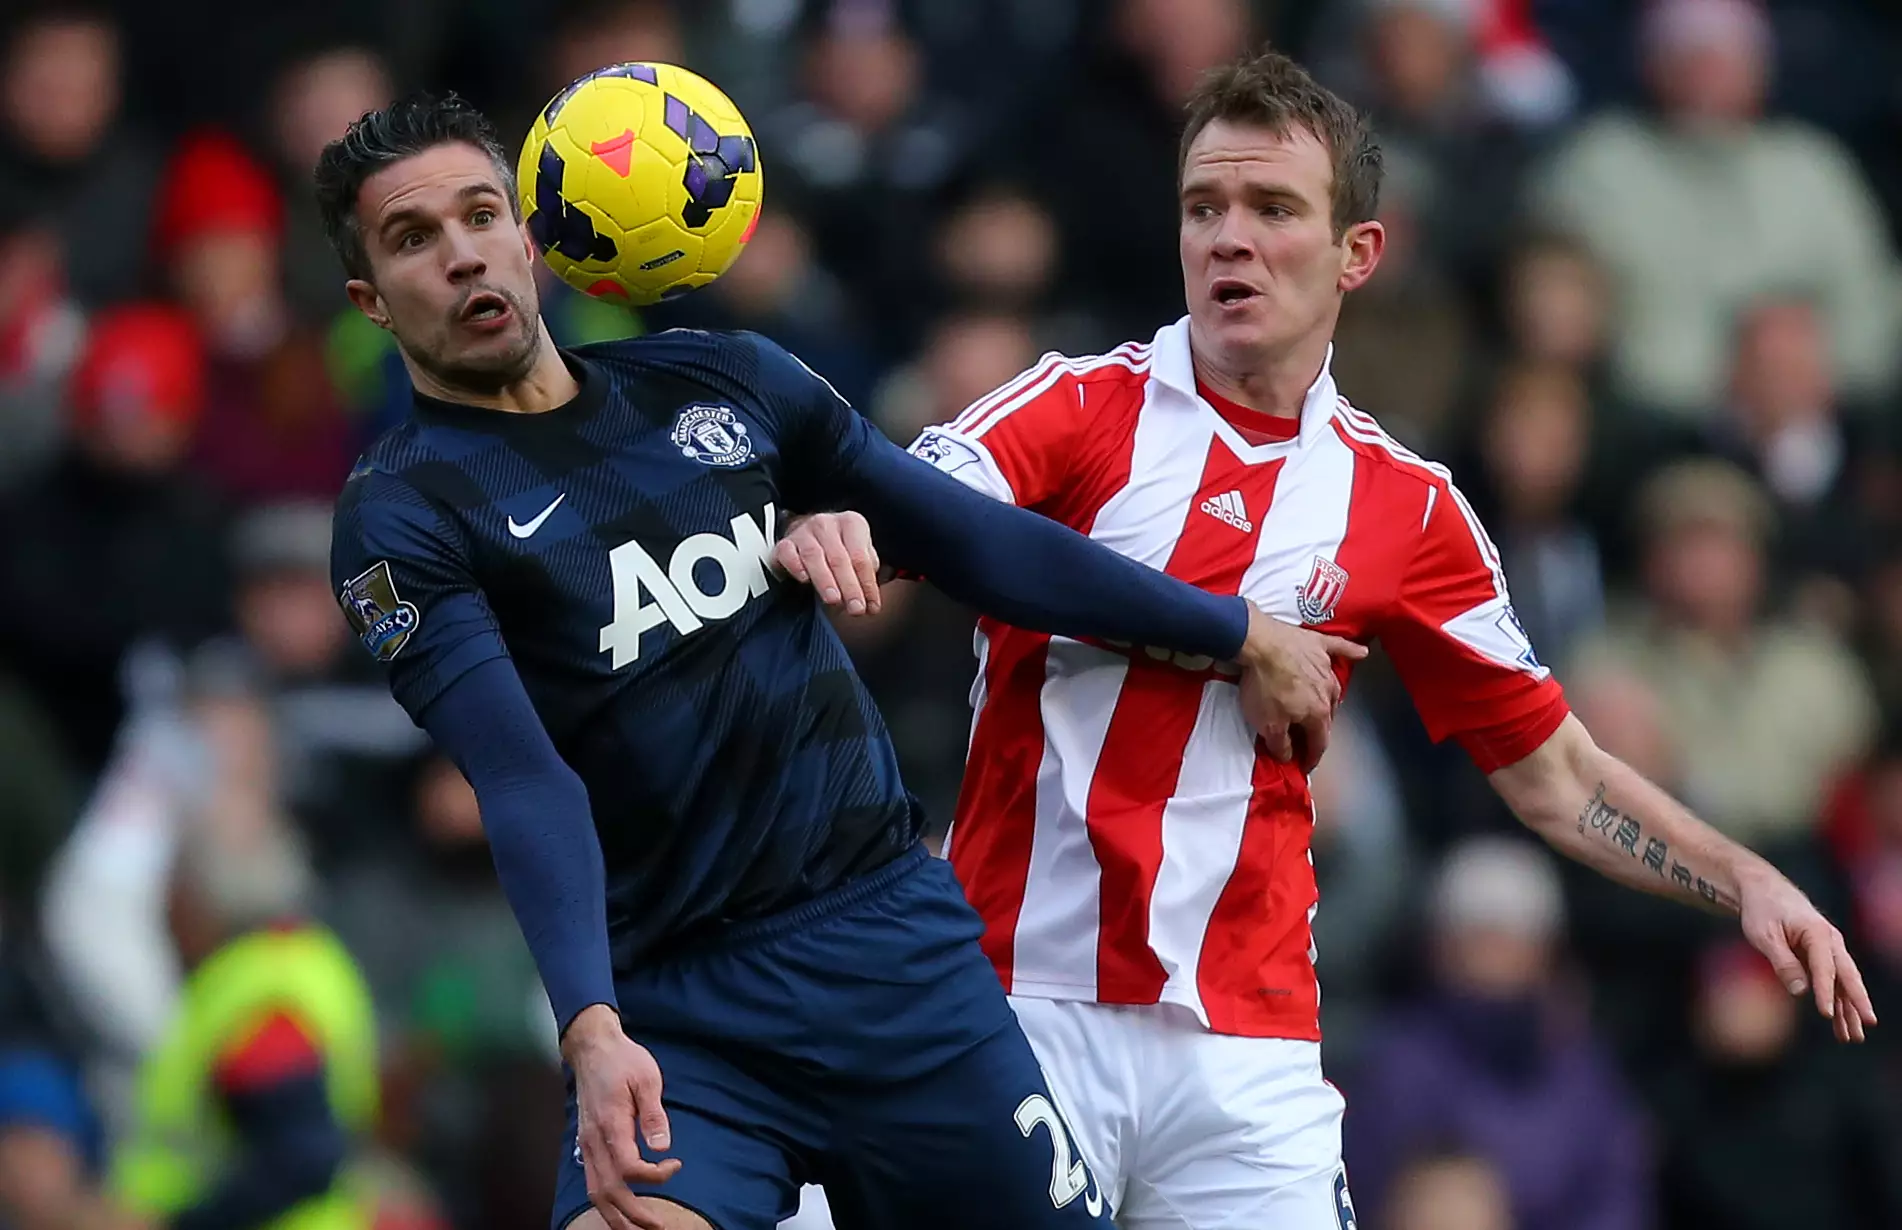 van Persie competing for the ball against Whelan. Image: PA